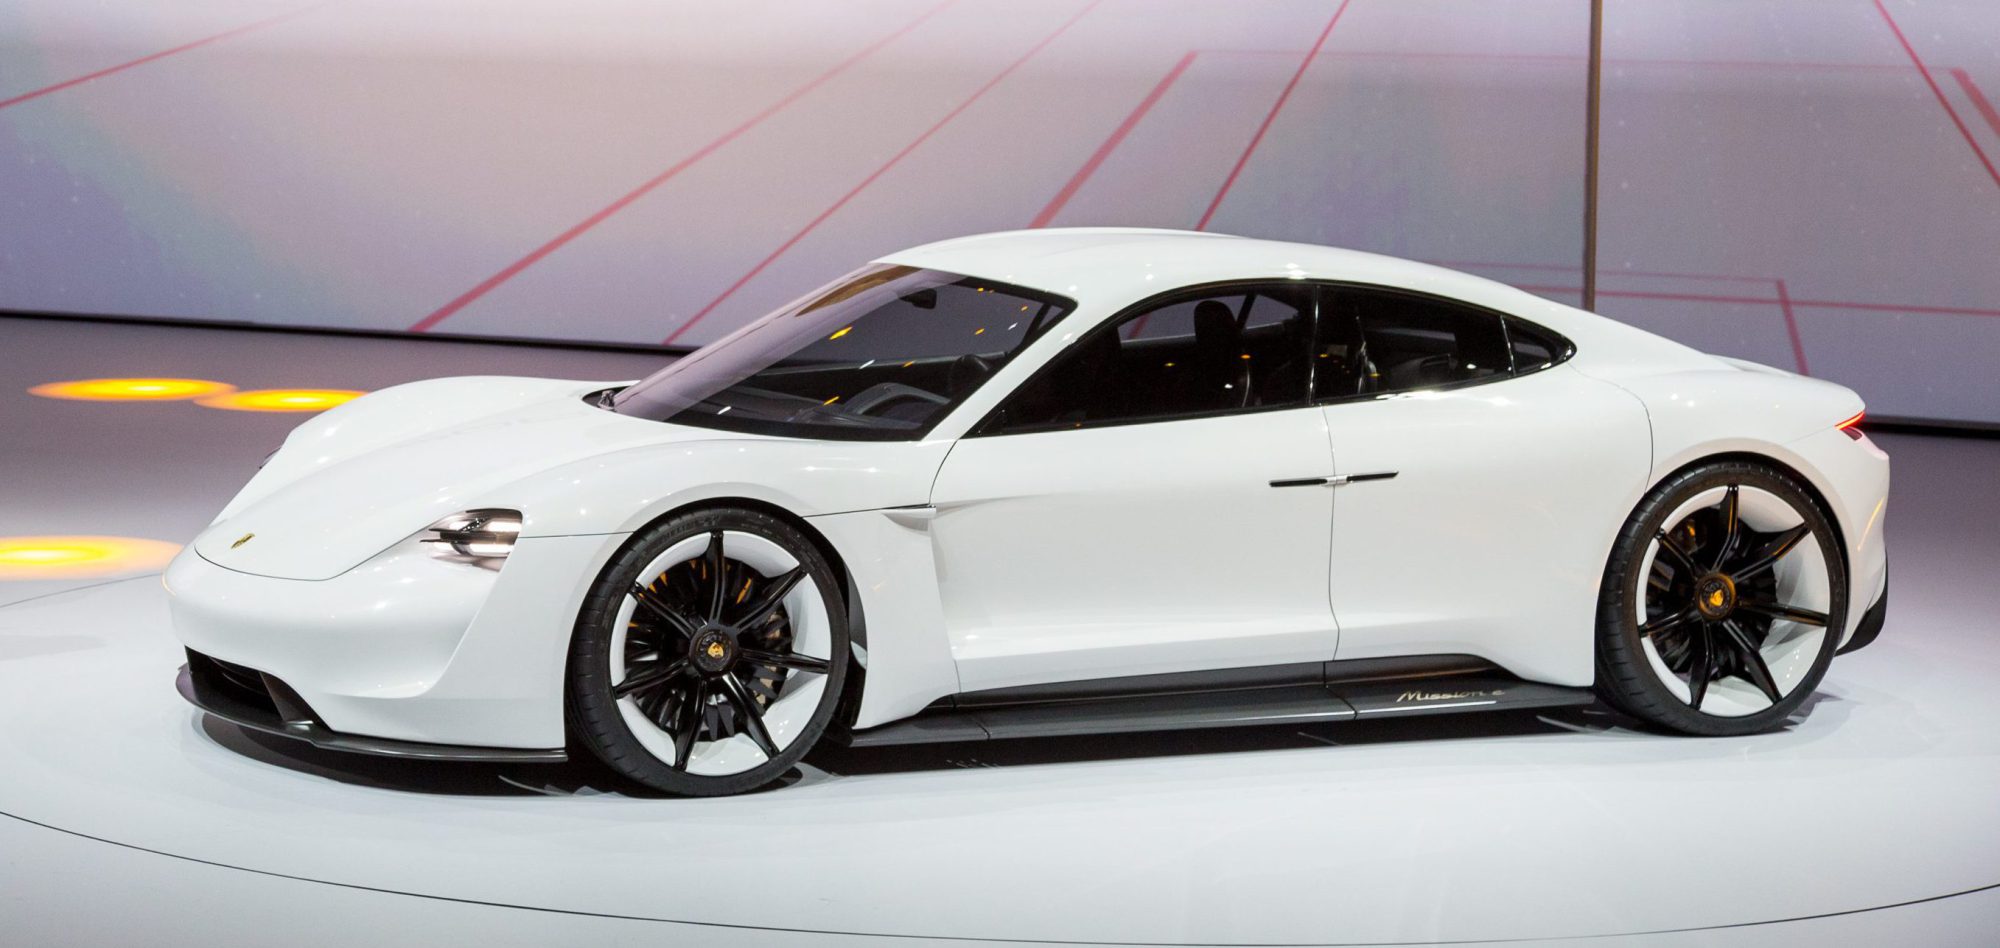 Of course you would lease, in 3 years you will have beeter batteries and more choice of cars - like the awesome Porsche Mission E